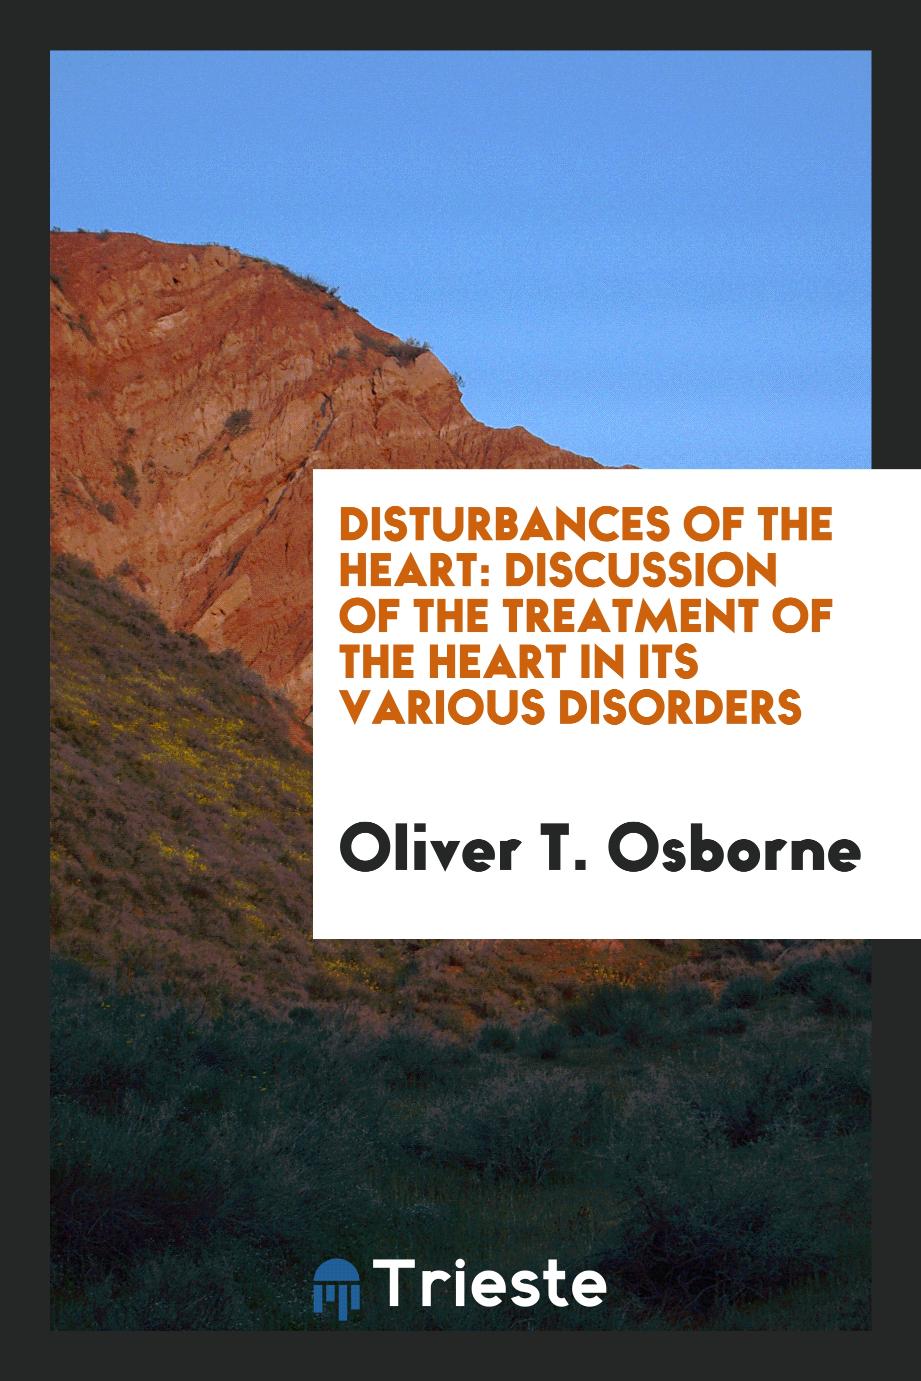 Oliver T. Osborne - Disturbances of the Heart: Discussion of the Treatment of the Heart in Its Various Disorders